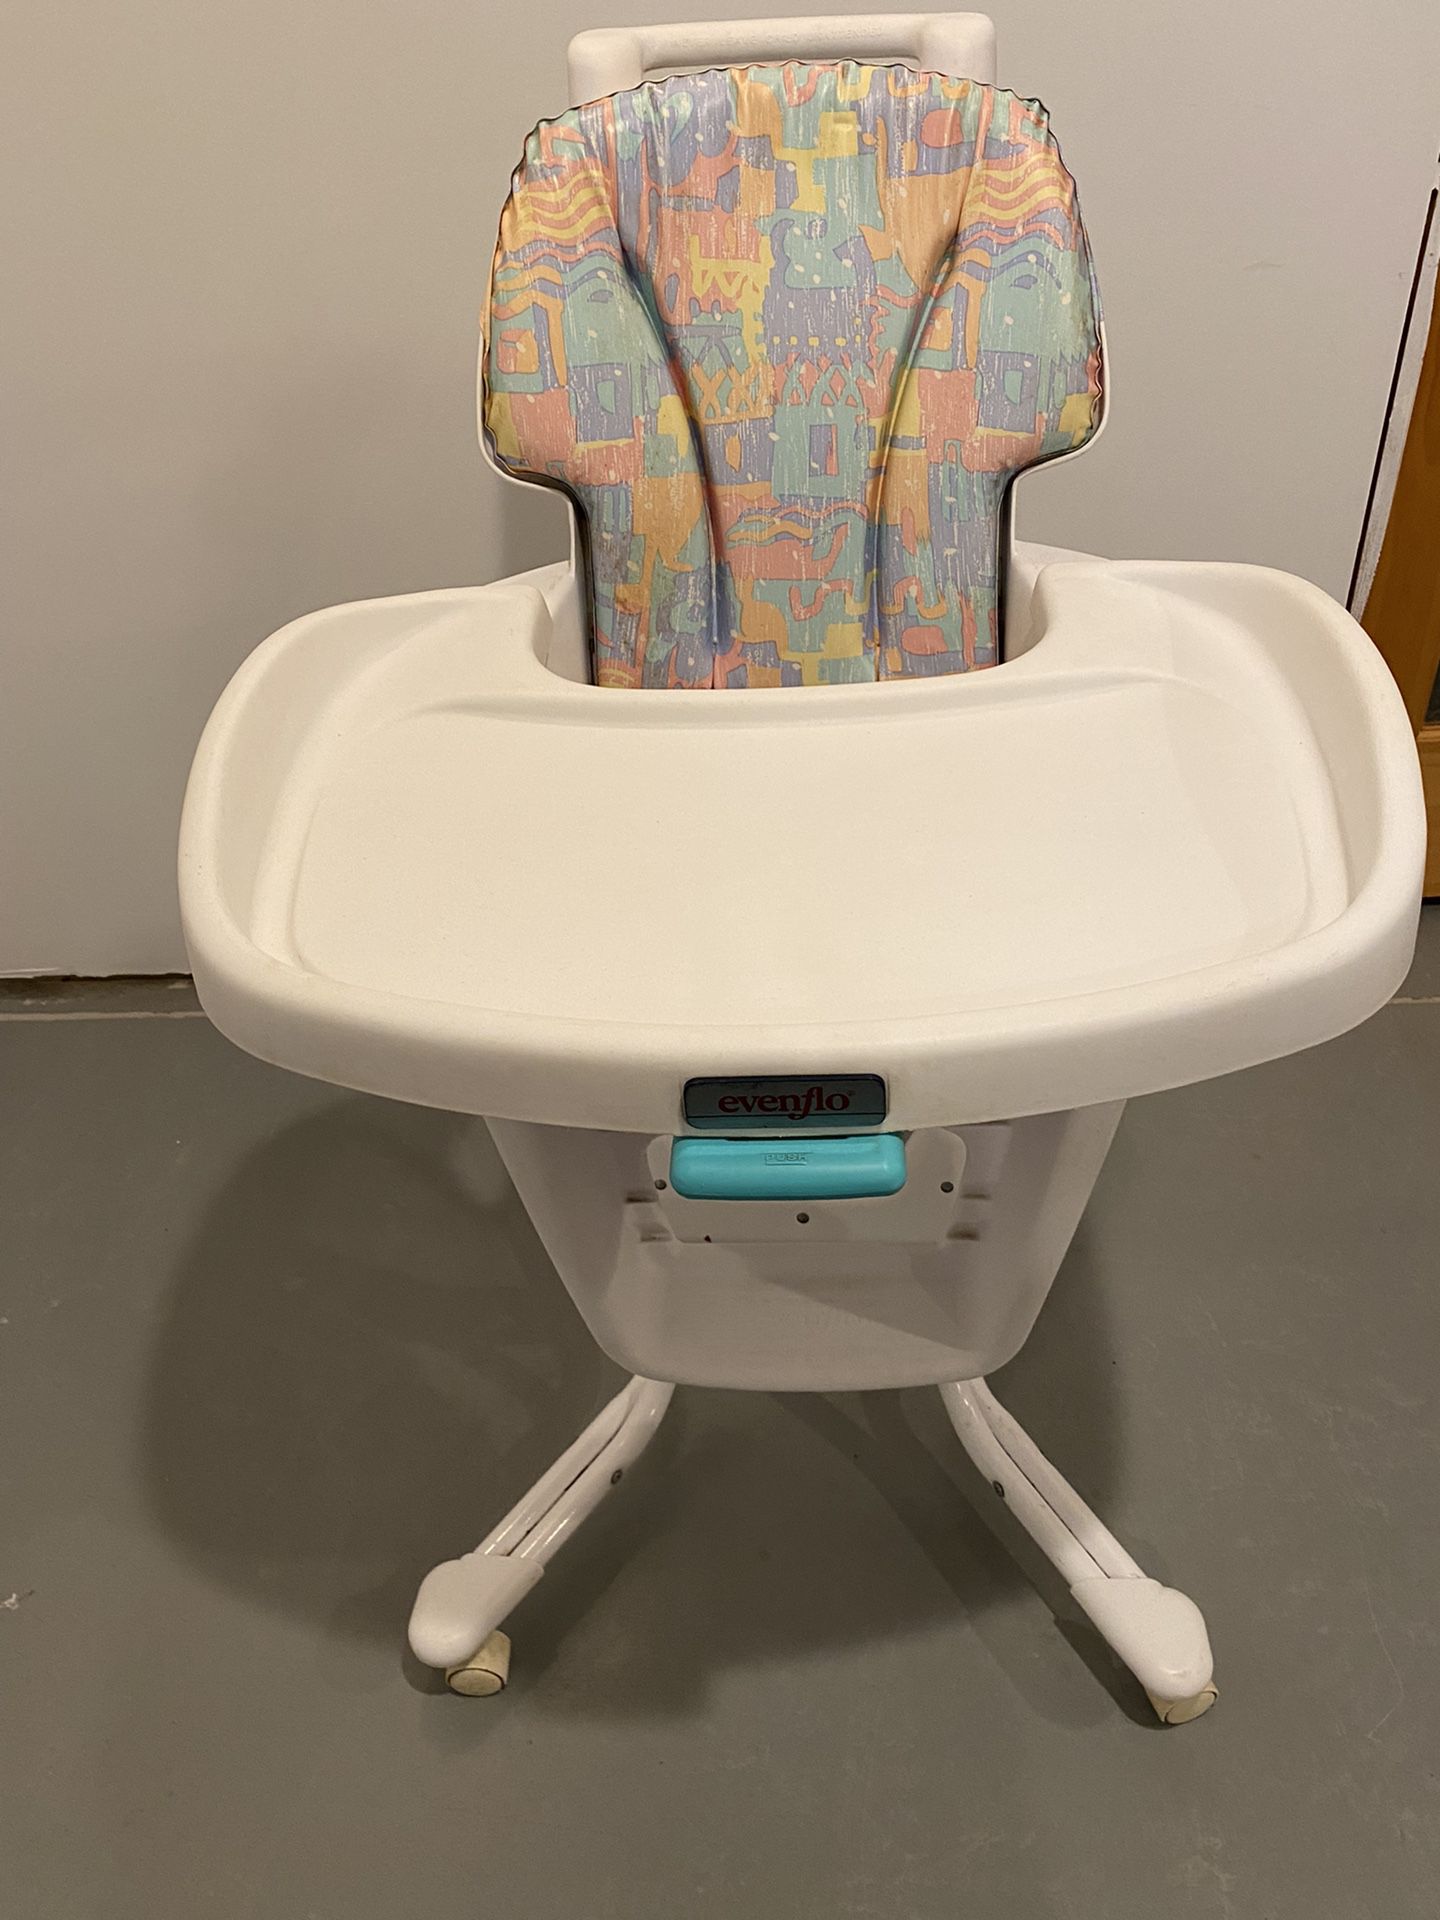 Adjustable High Chair With Wheels 